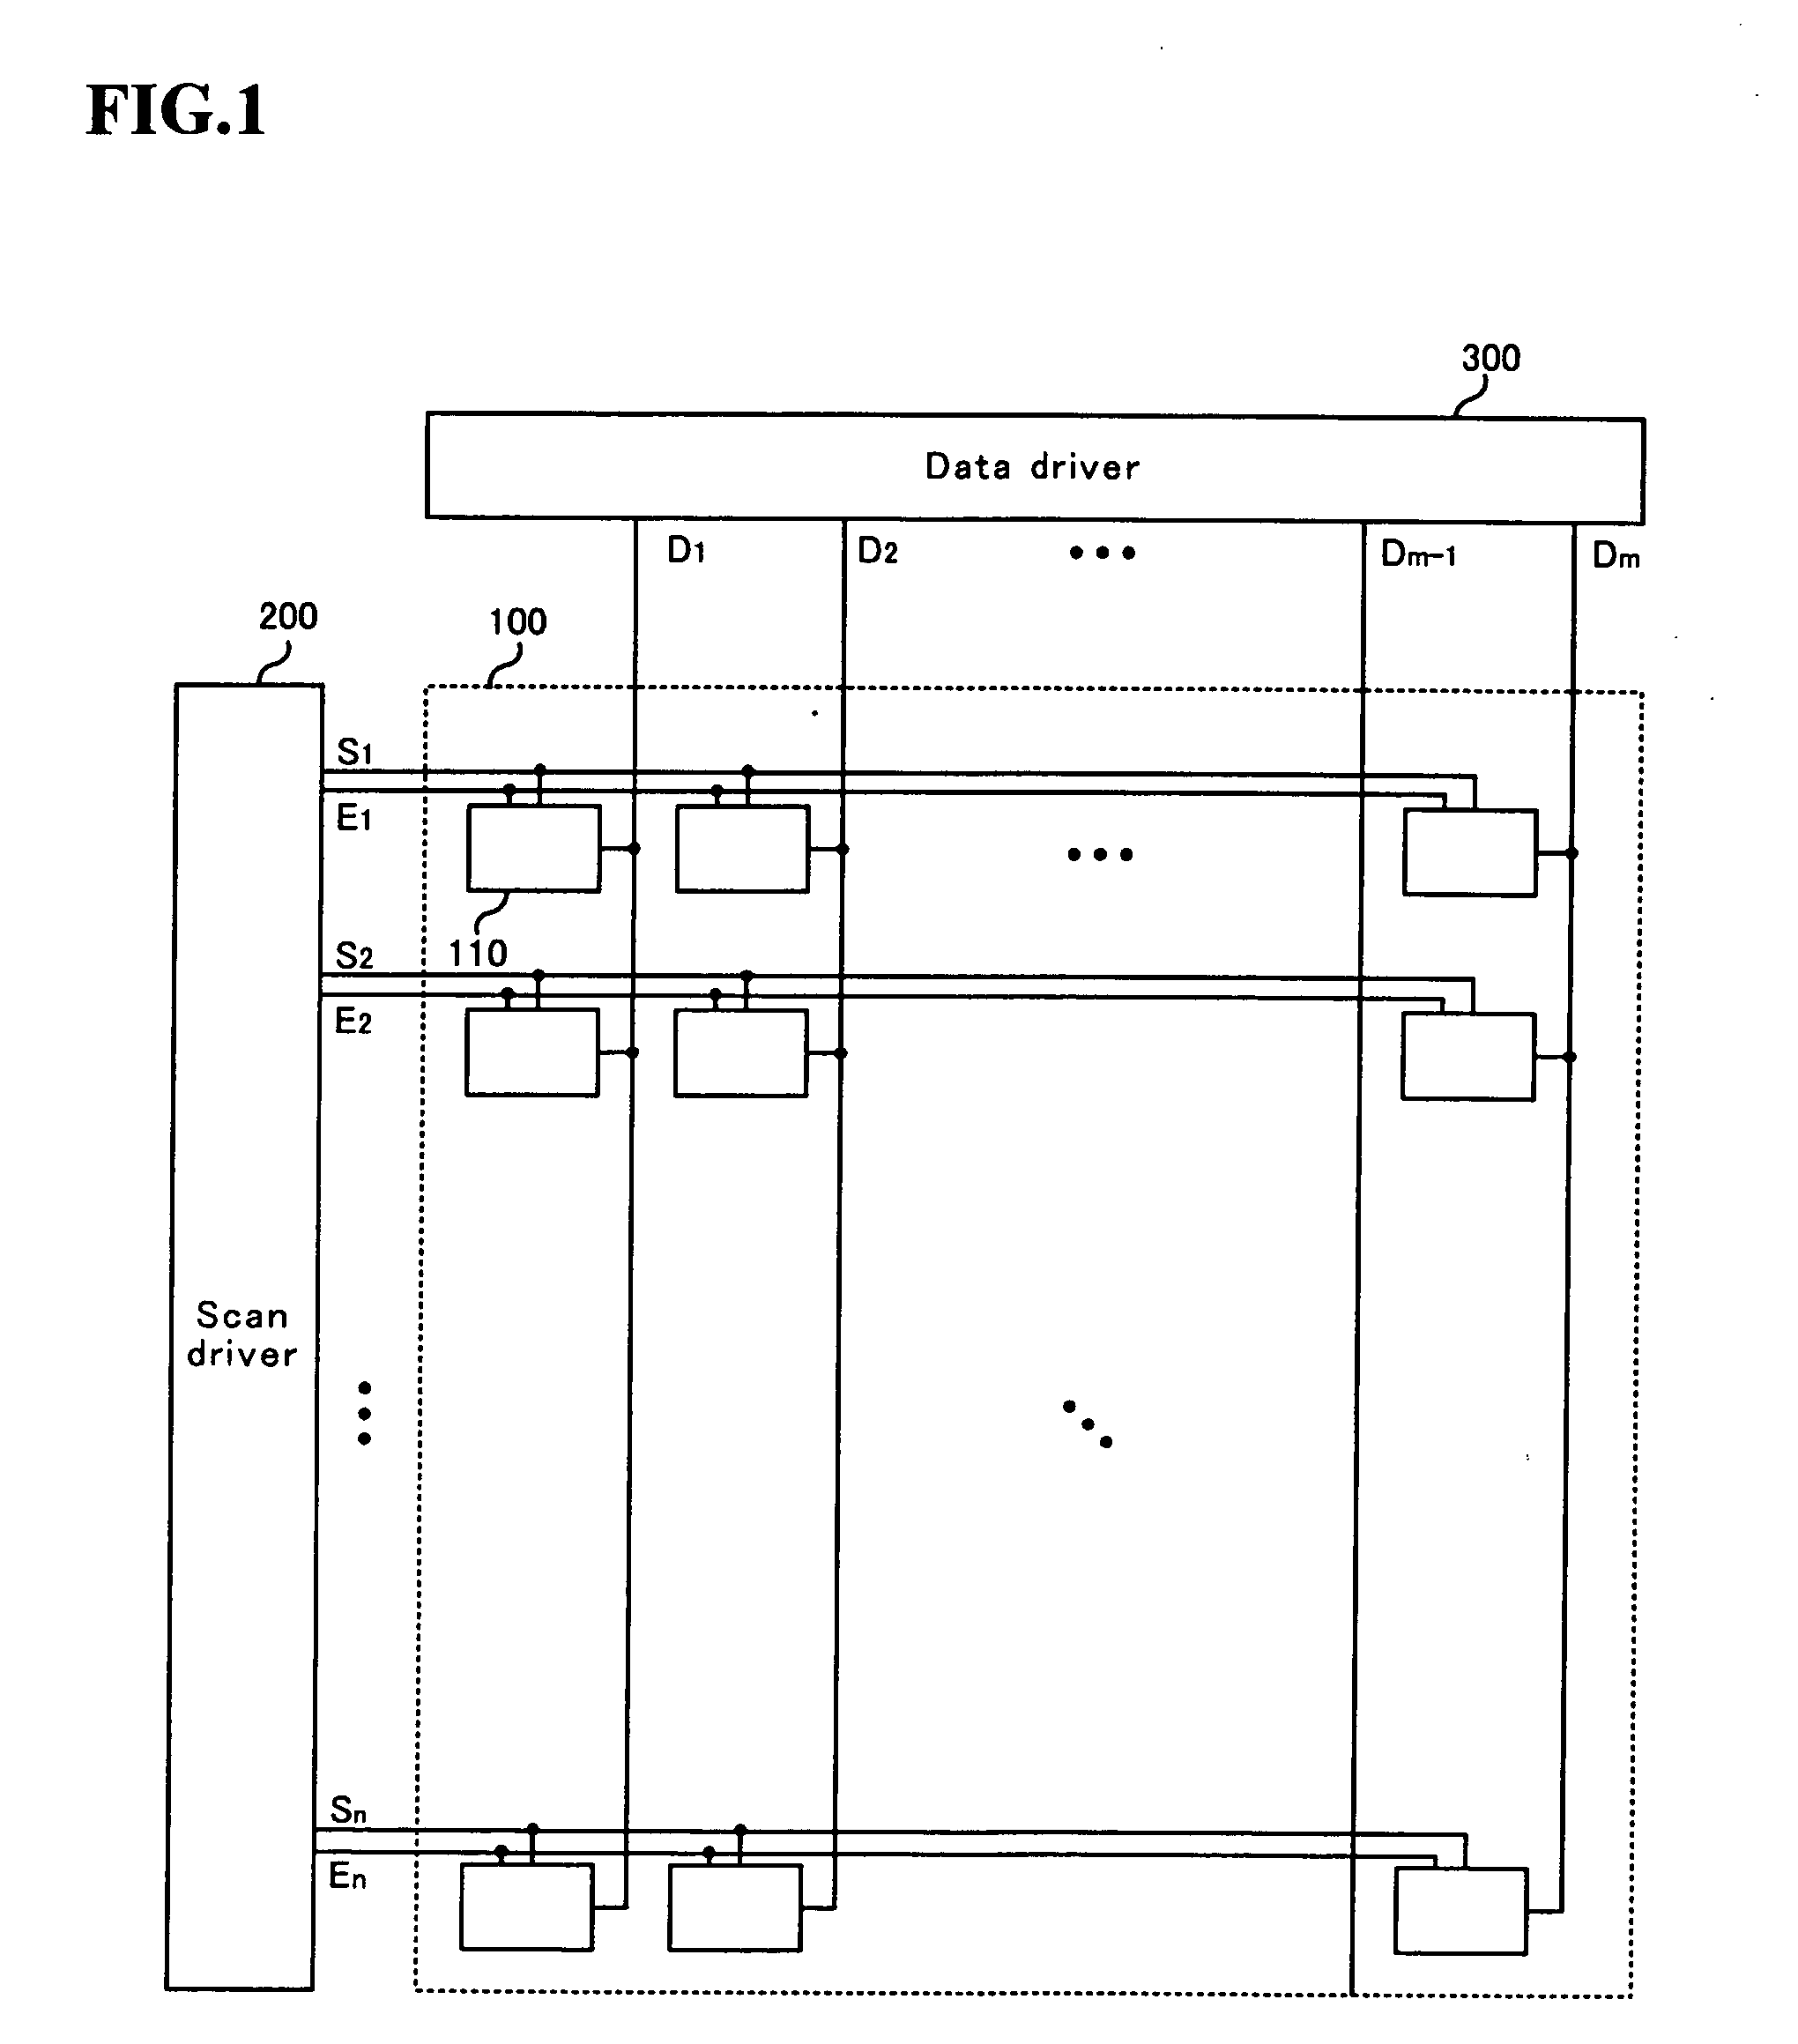 Data driving apparatus in a current driving type display device